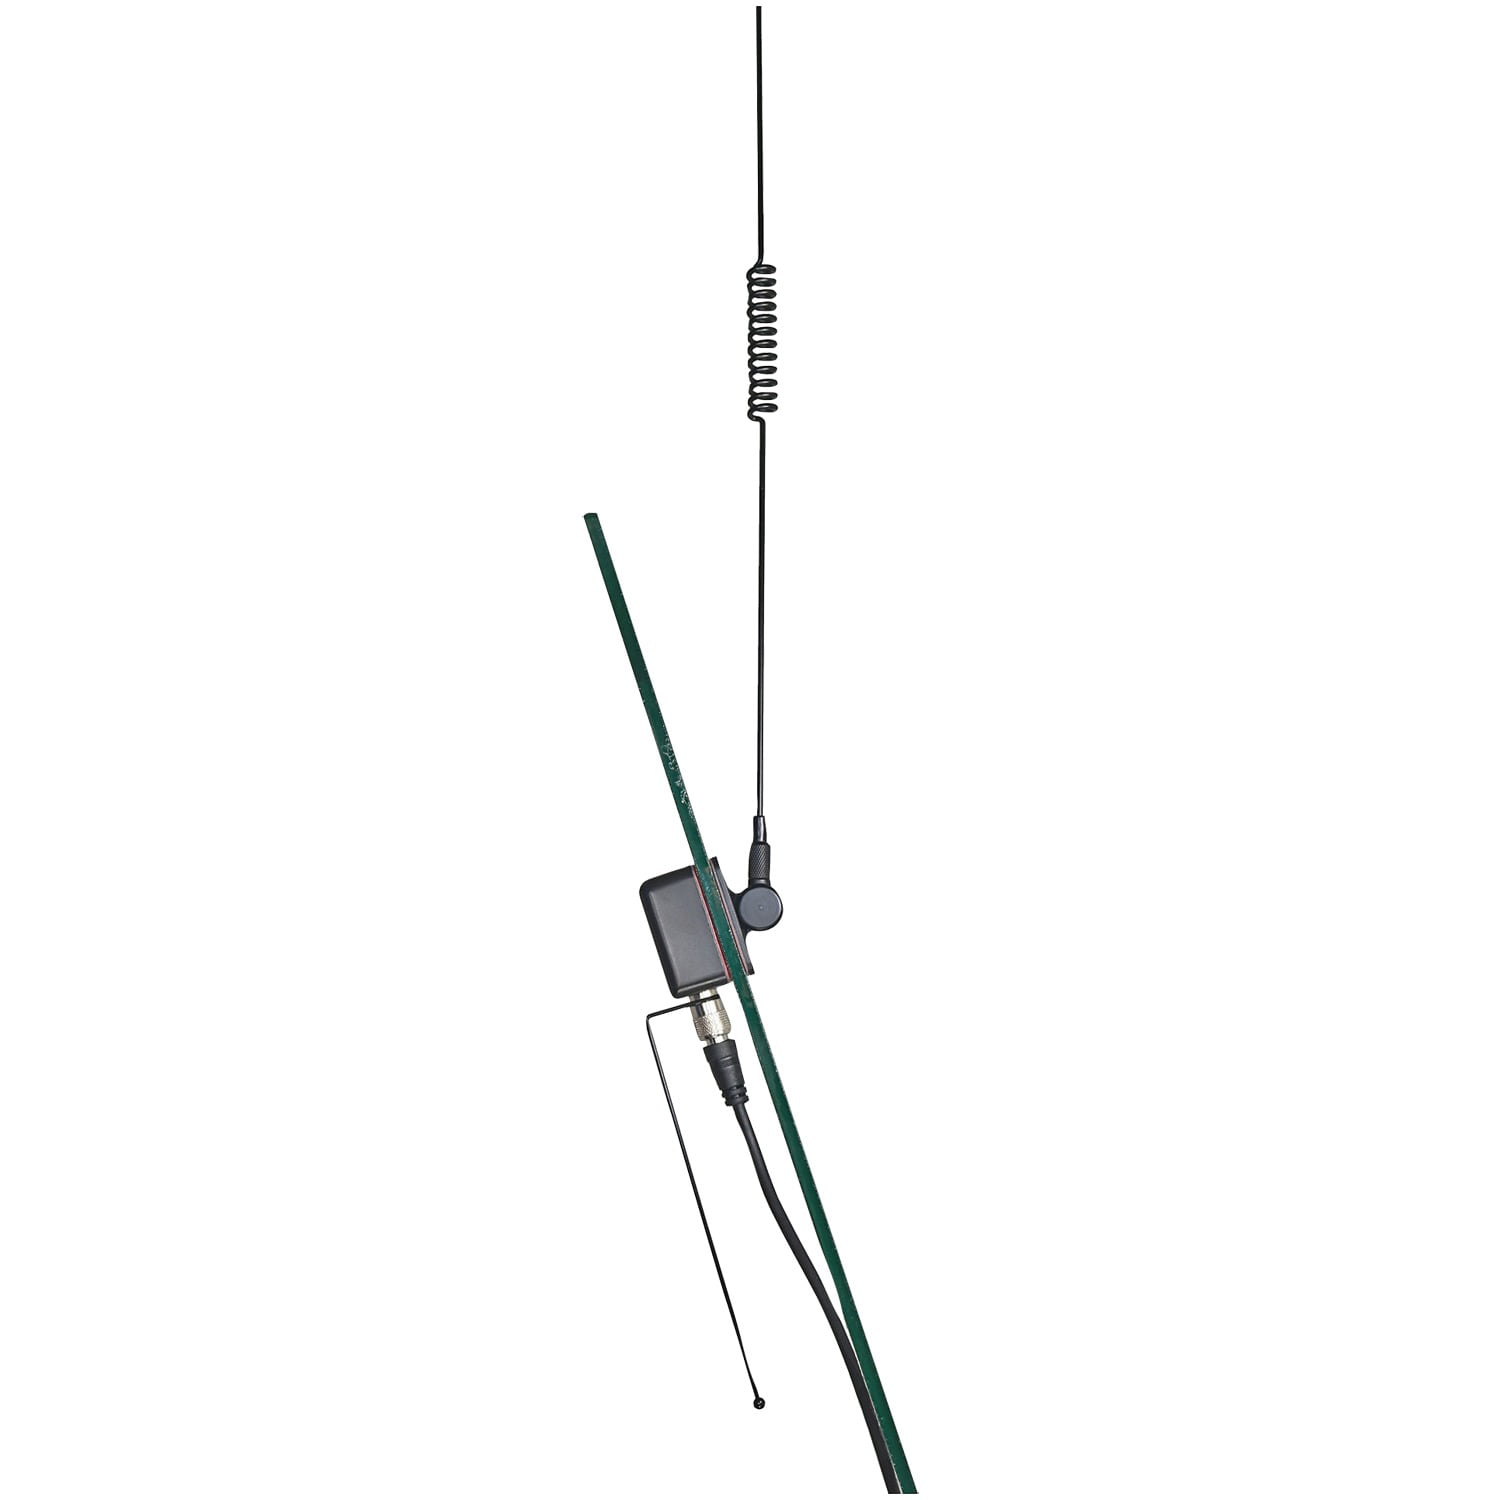 Tram 1192 Pre-tuned 150mhz-450mhz Vhf/450hhz-470mhz Uhf Dual-band Land Mobile Glass-mount Antenna